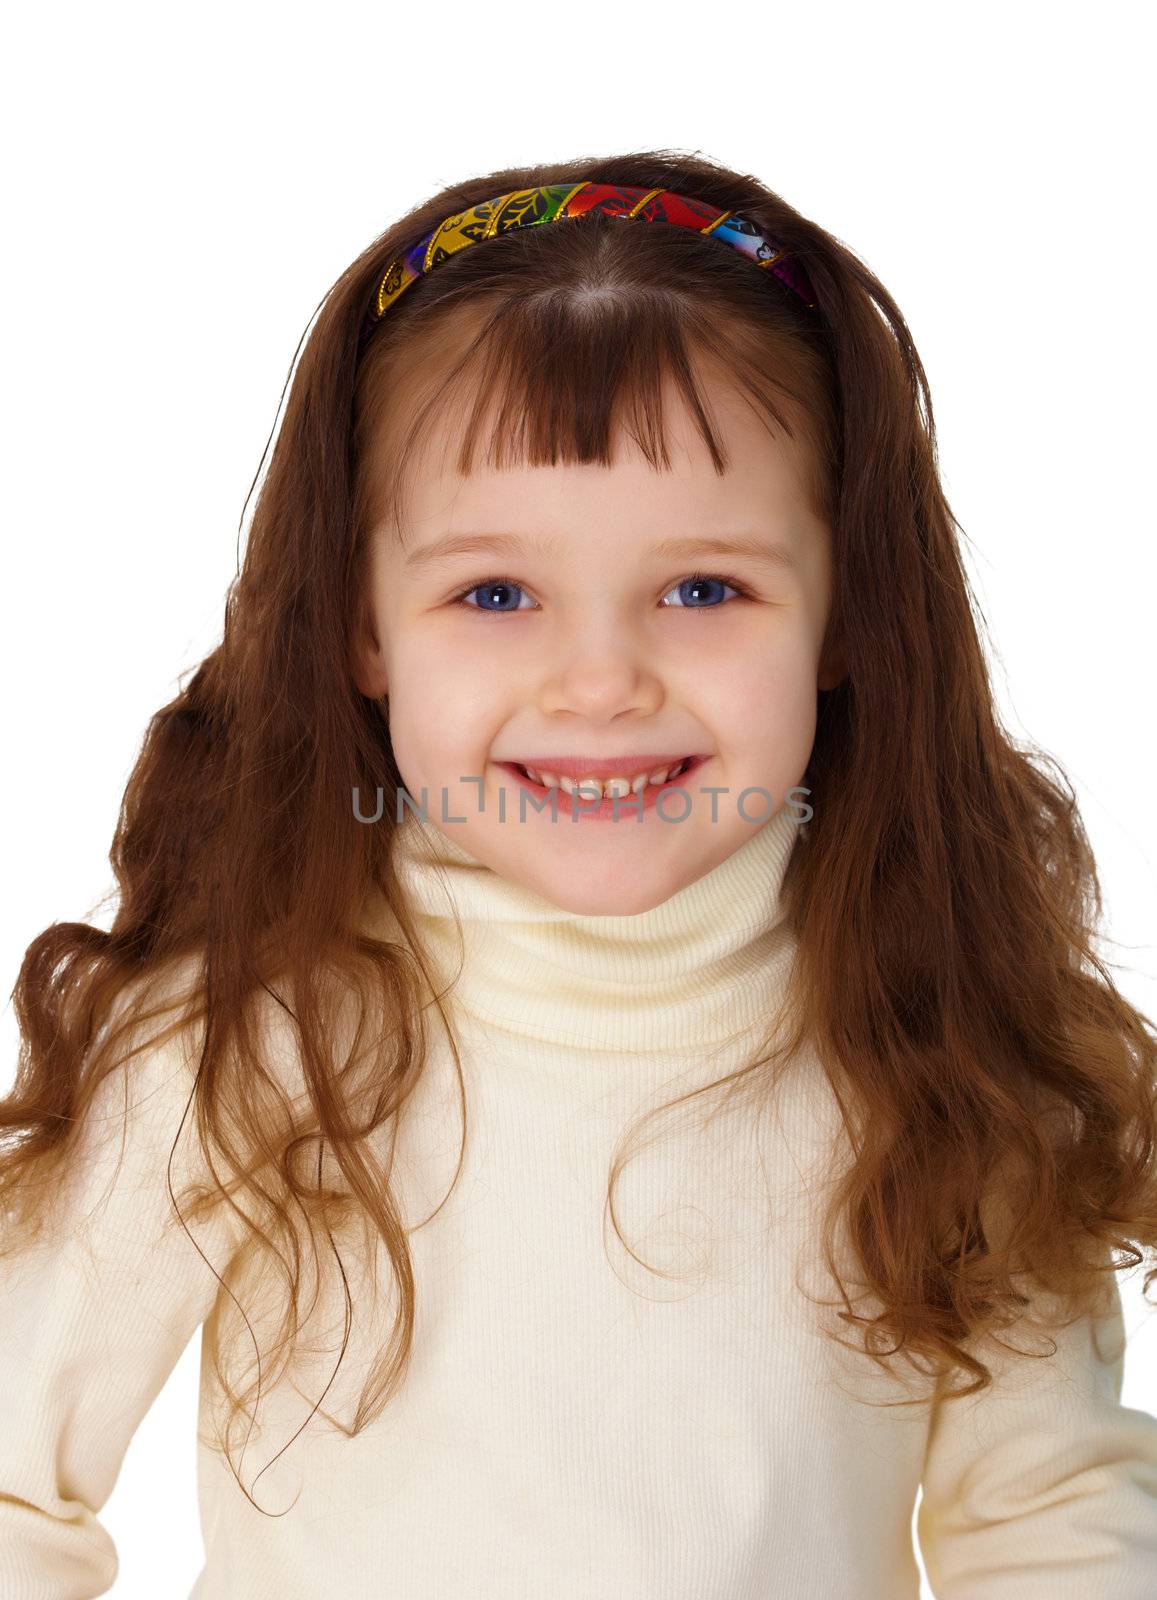 Portrait of a smiling girl with long hair isolated on white background